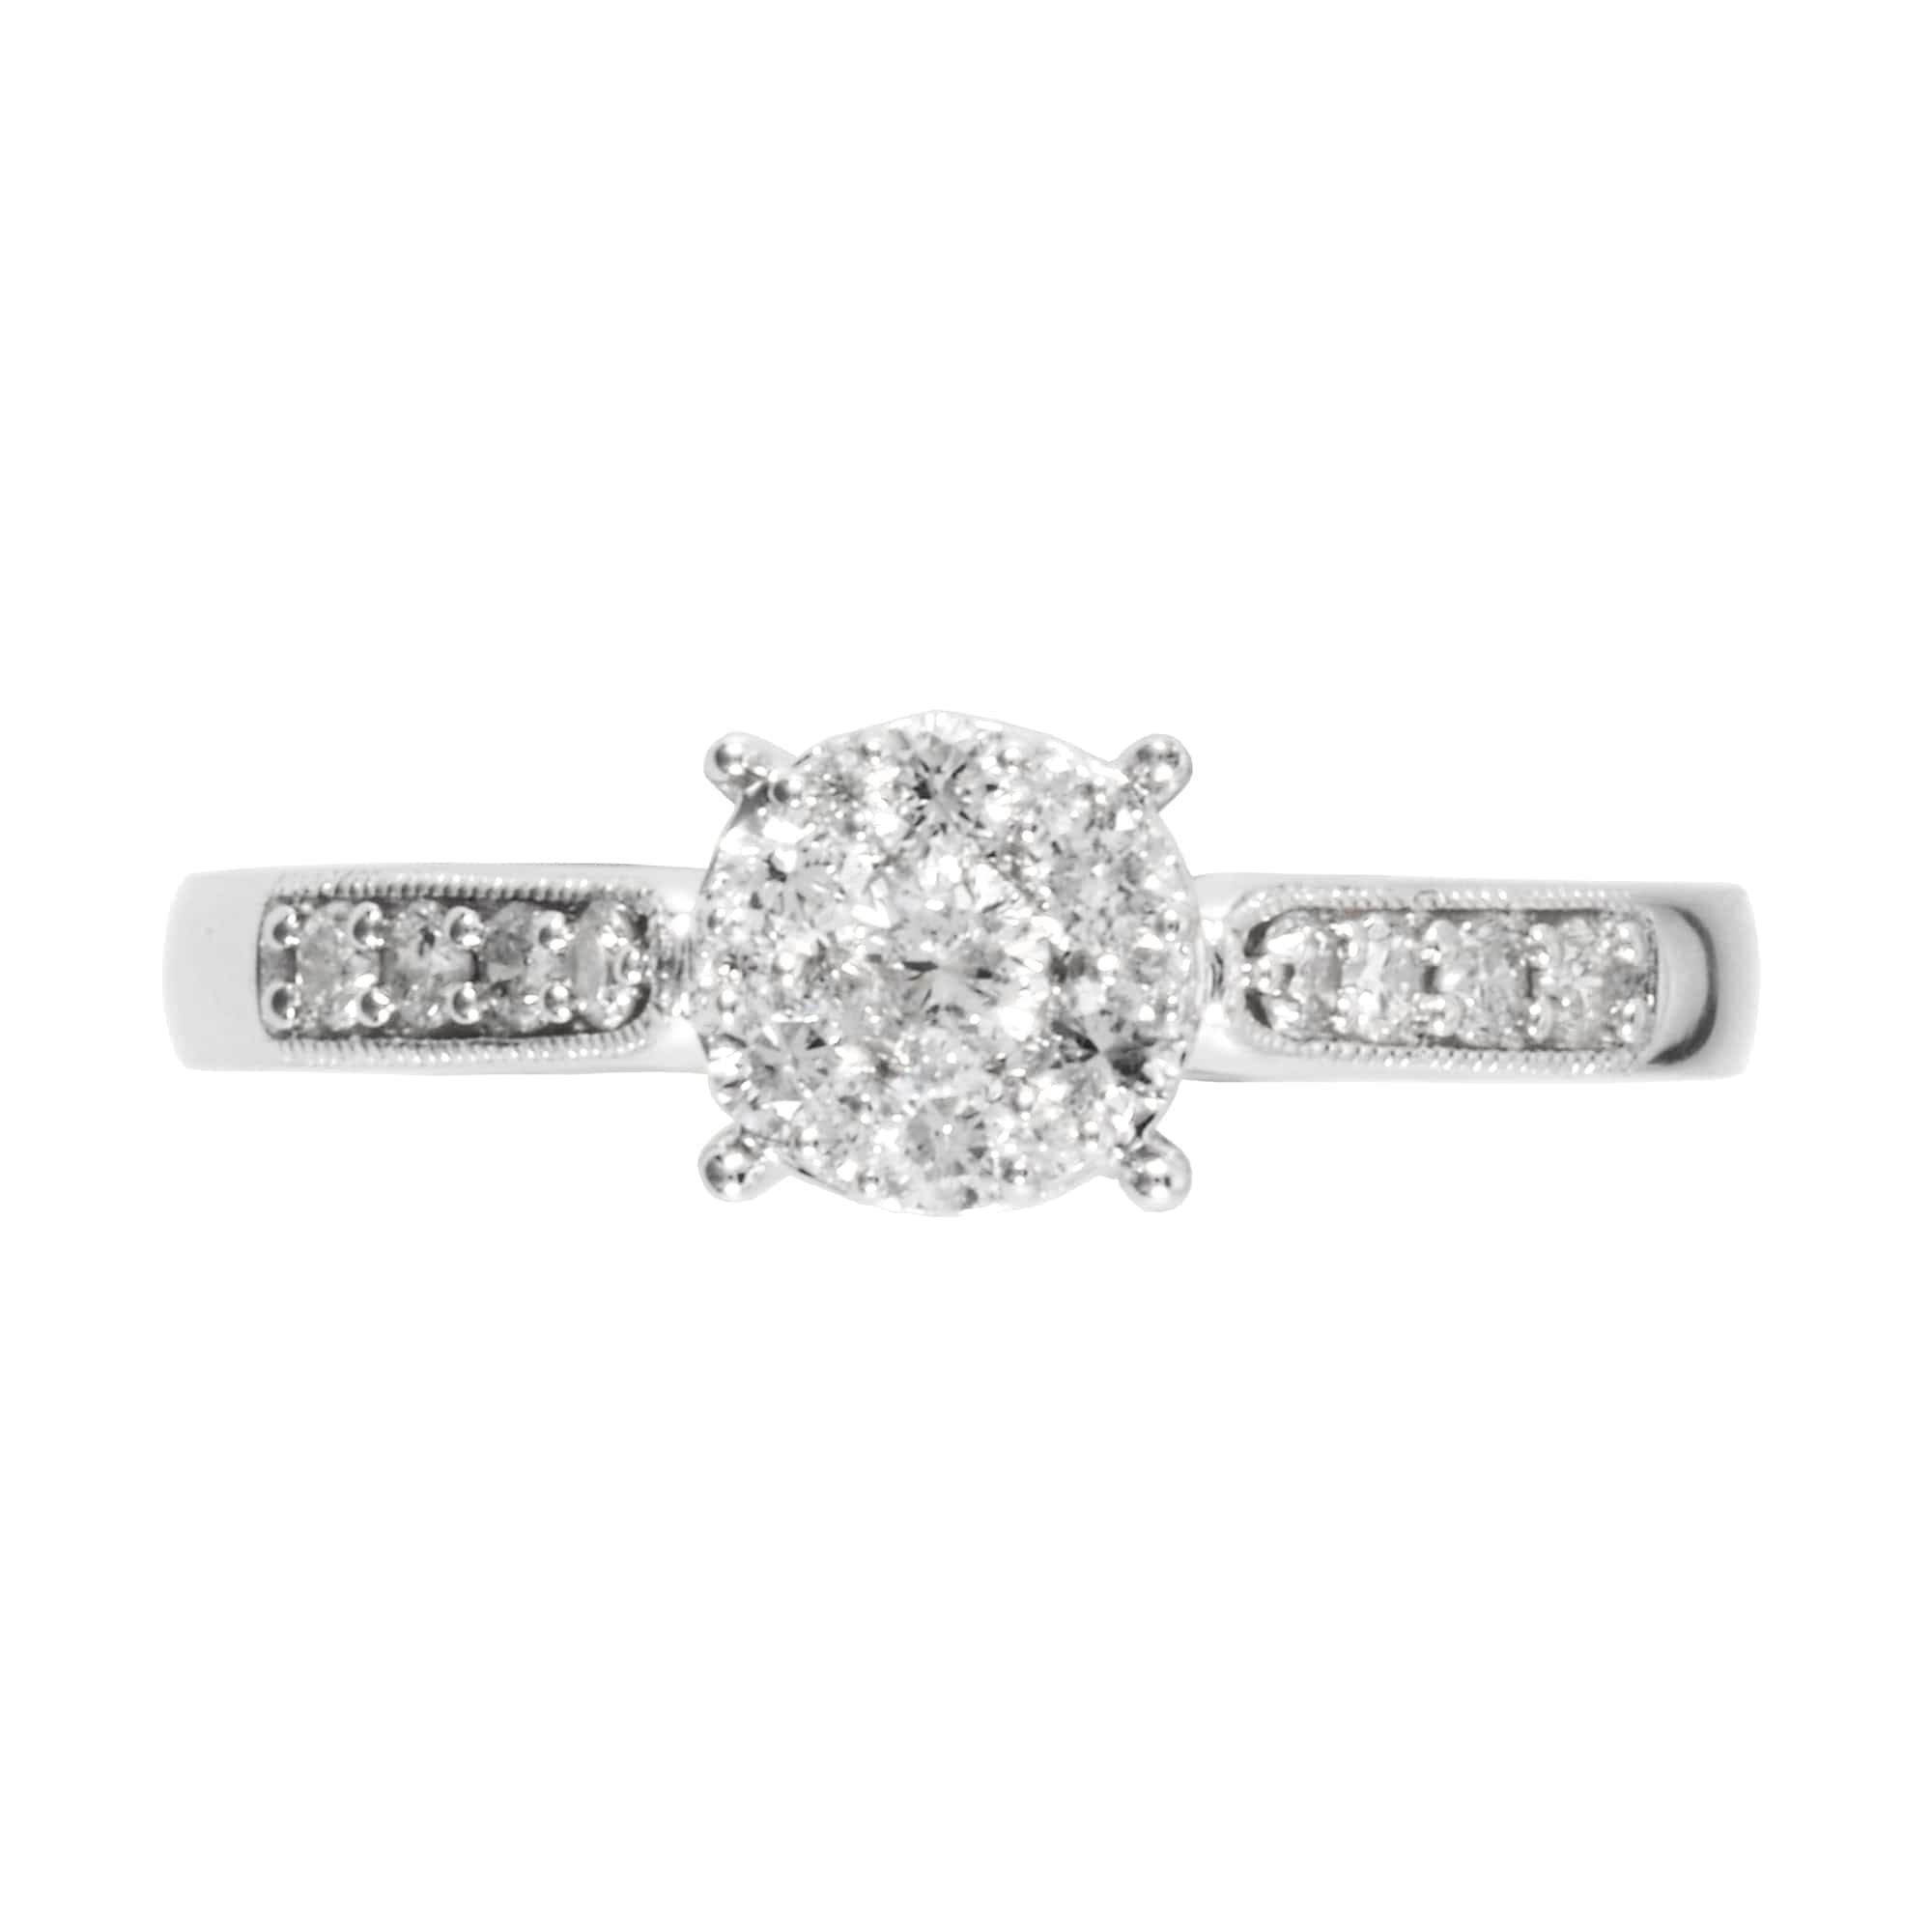 RG034787 Classic Round Diamond Solitaire Ring in 18ct White Gold 2